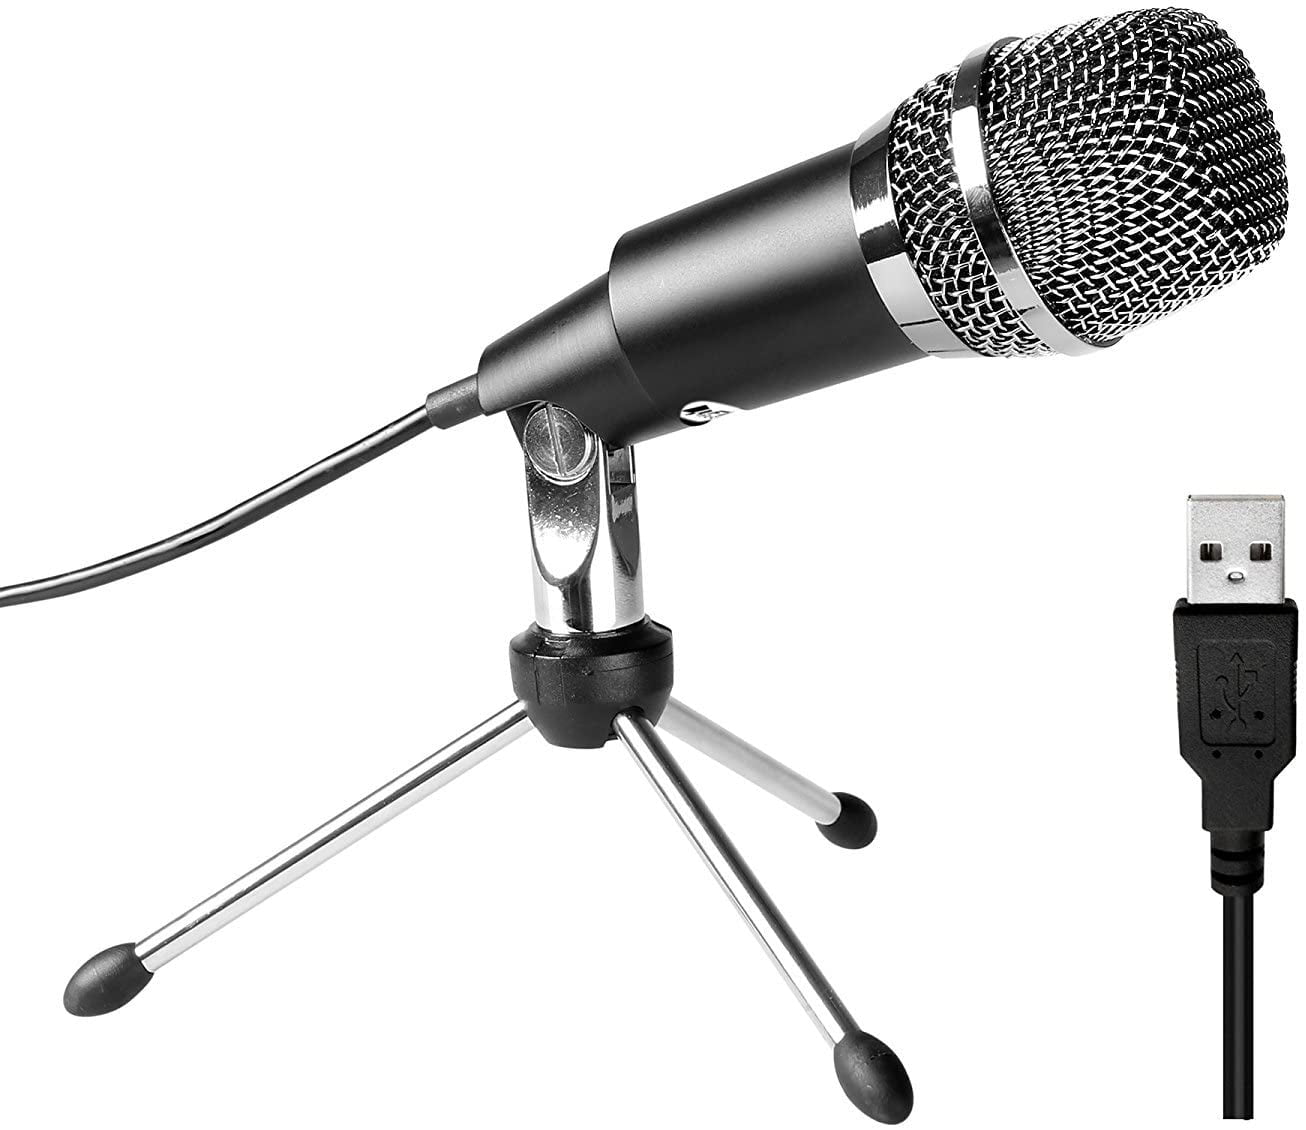 USB Microphone for Computer Compatible with Windows/Mac Condenser Microphone Plug &Play Desktop Podcast Microphone for Gaming Recording Streaming Videos Chatting Skype YouTube